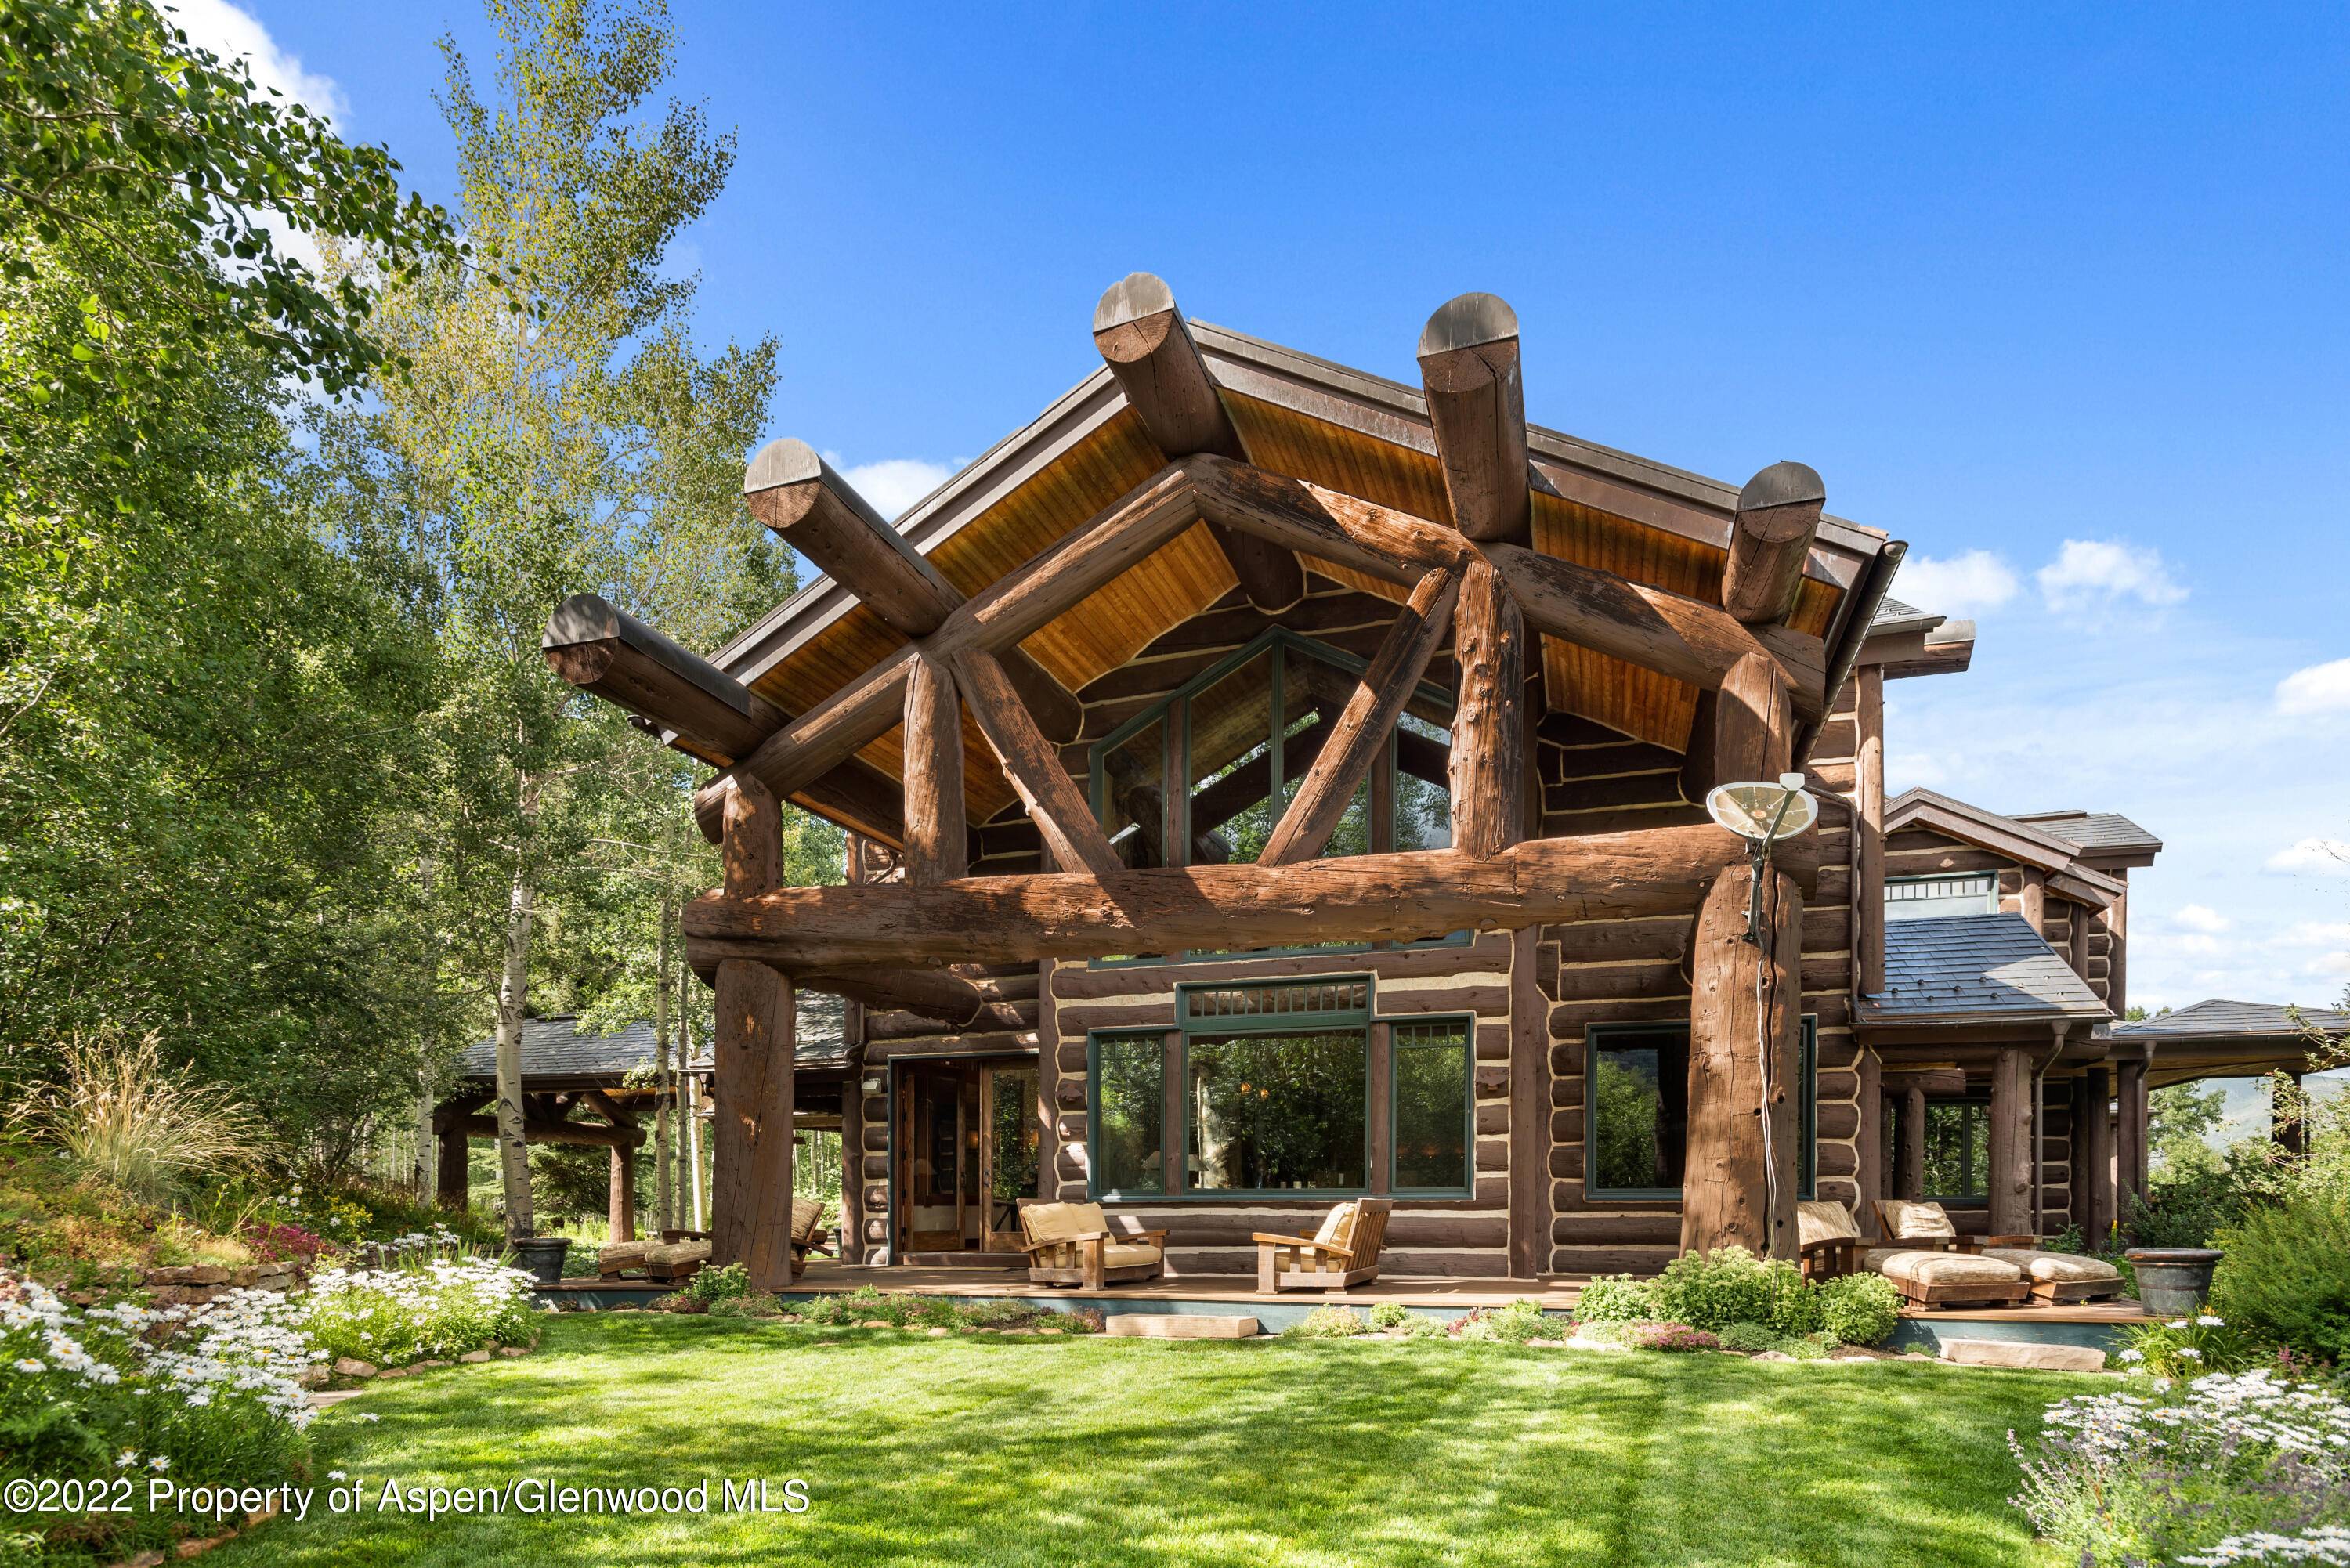 A timeless Colorado lodge on 44 private acres in a stunning alpine setting just minutes up Castle Creek Valley from the Aspen roundabout via a brand new paved drive.